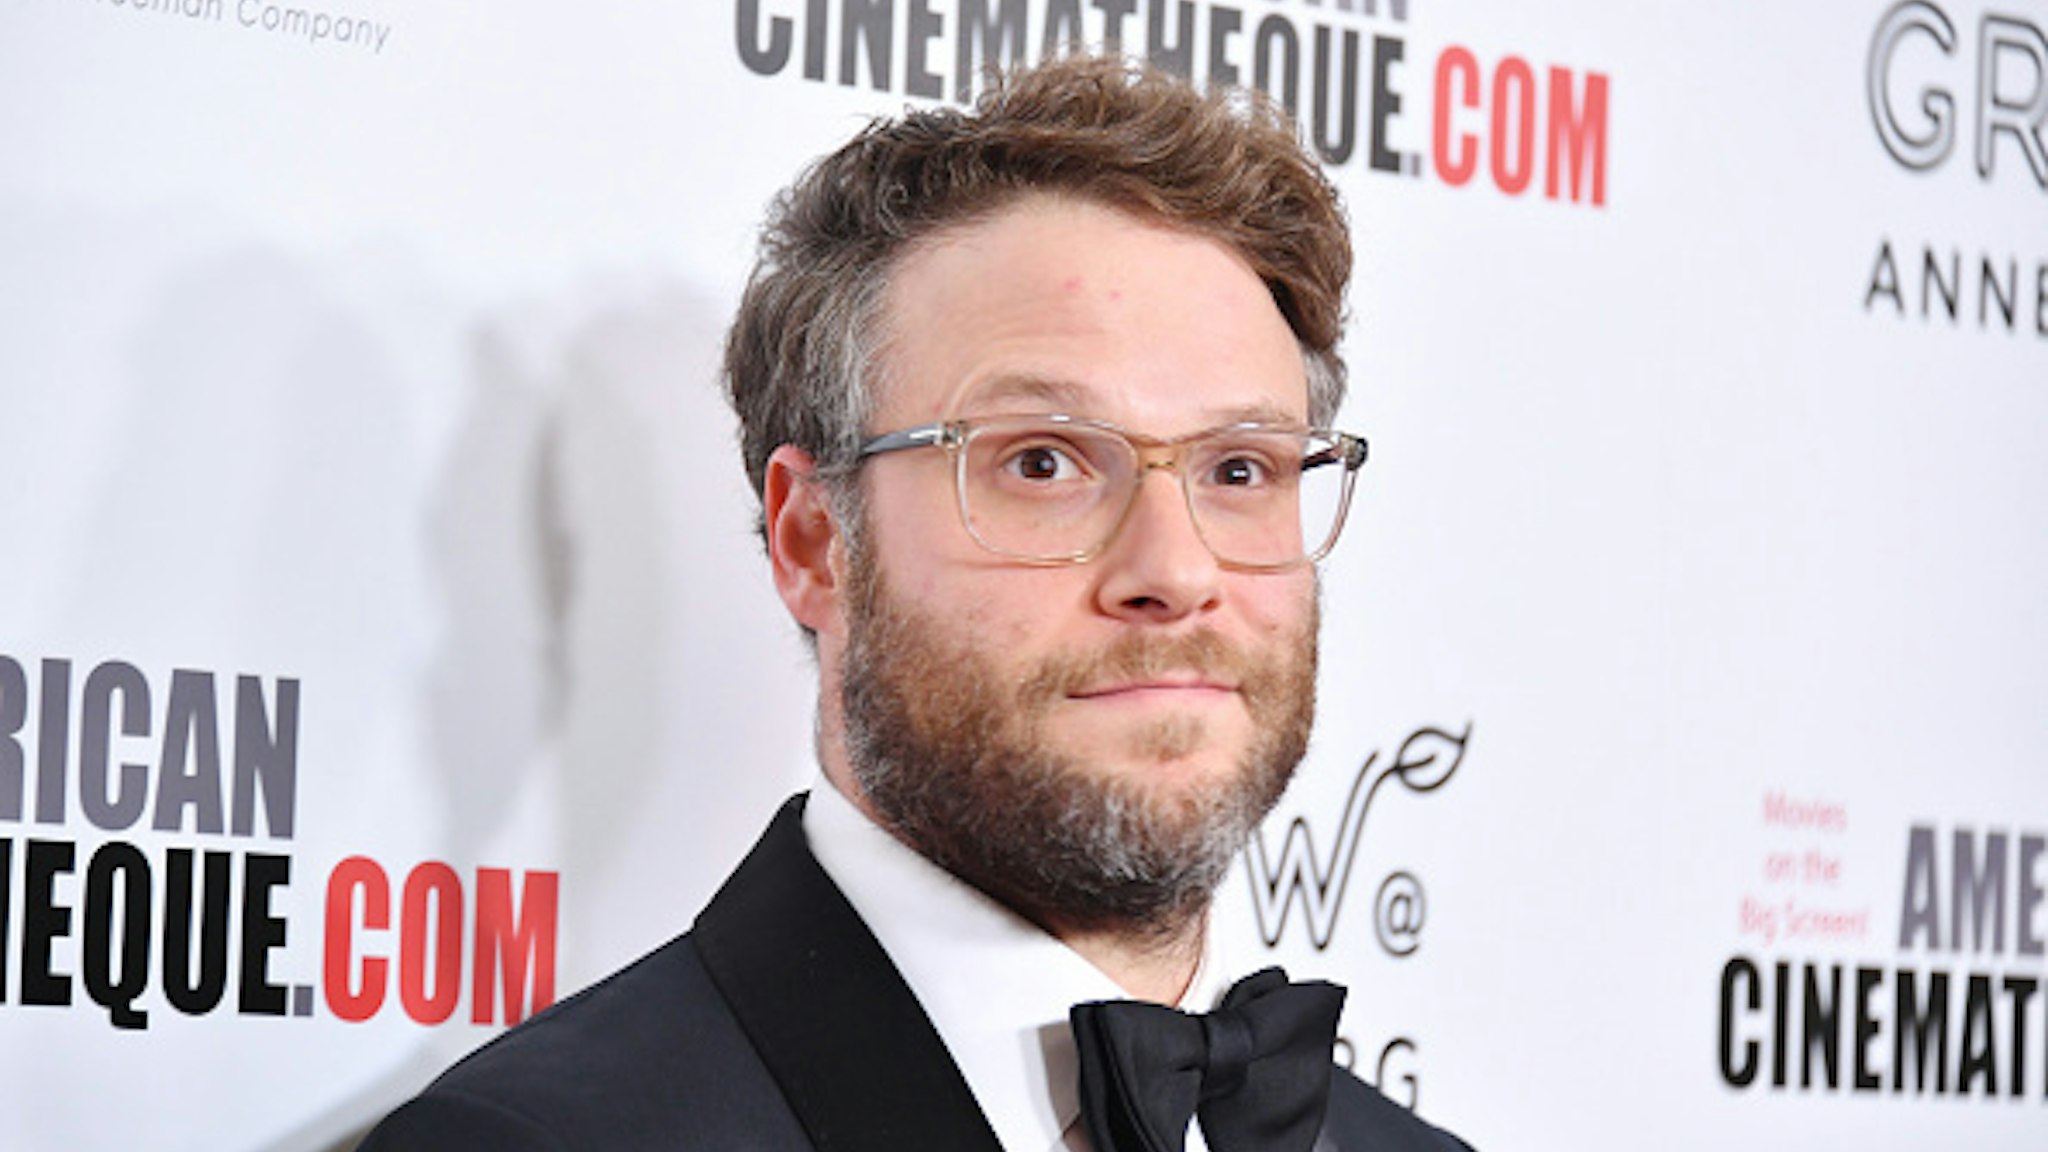 BEVERLY HILLS, CALIFORNIA - NOVEMBER 08: Seth Rogen attends the 33rd American Cinematheque Award Presentation Honoring Charlize Theron at The Beverly Hilton Hotel on November 08, 2019 in Beverly Hills, California.